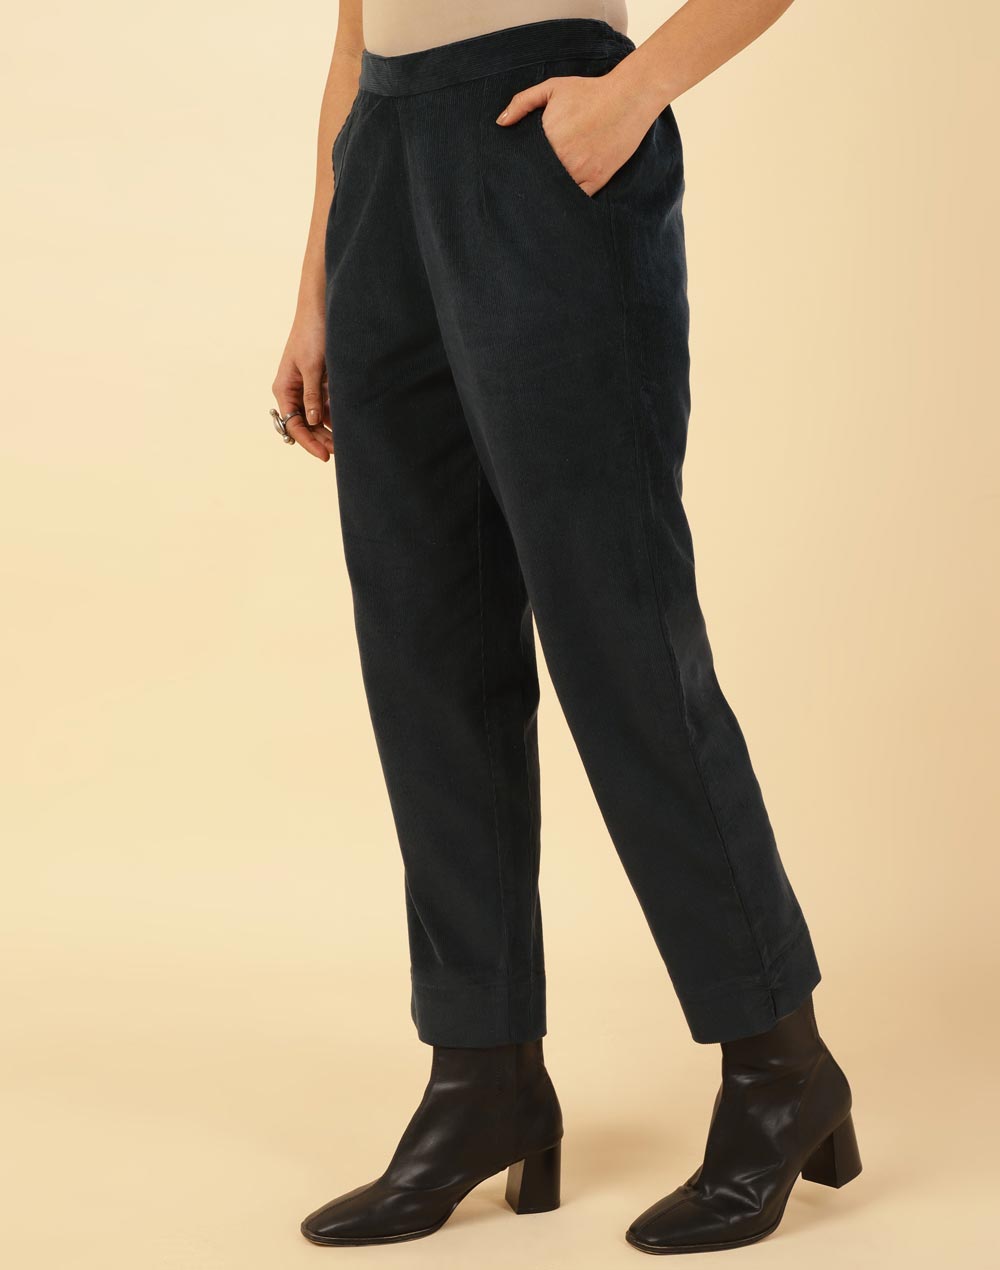 Buy Black Cotton Ankle Length Casual Pant for Women Online at